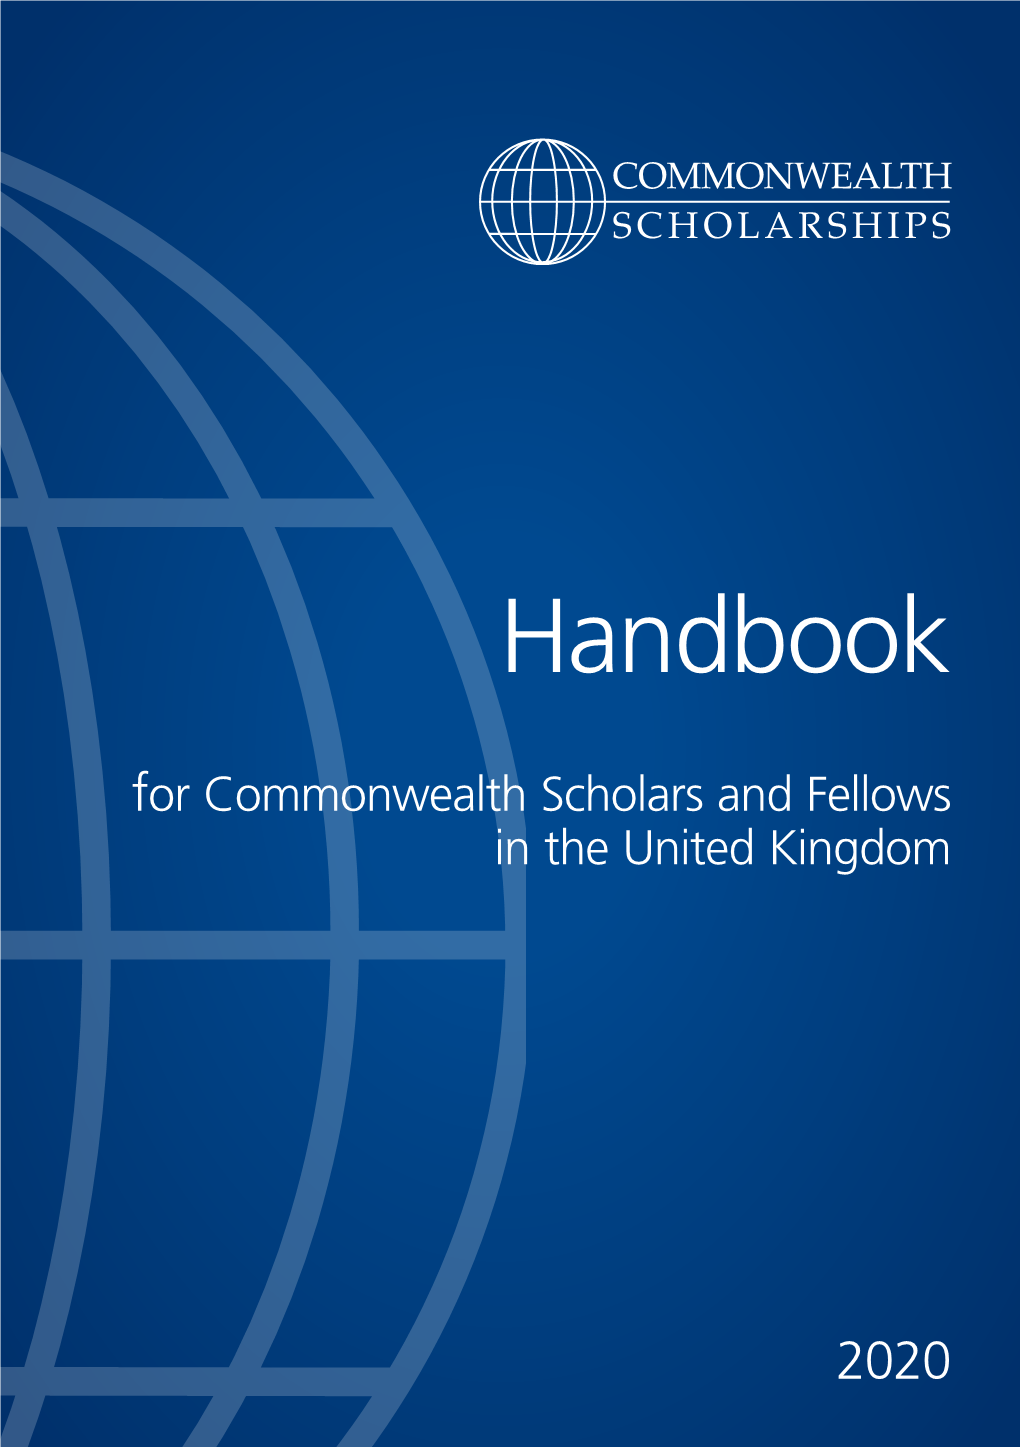 Handbook for Commonwealth Scholars and Fellows in the United Kingdom